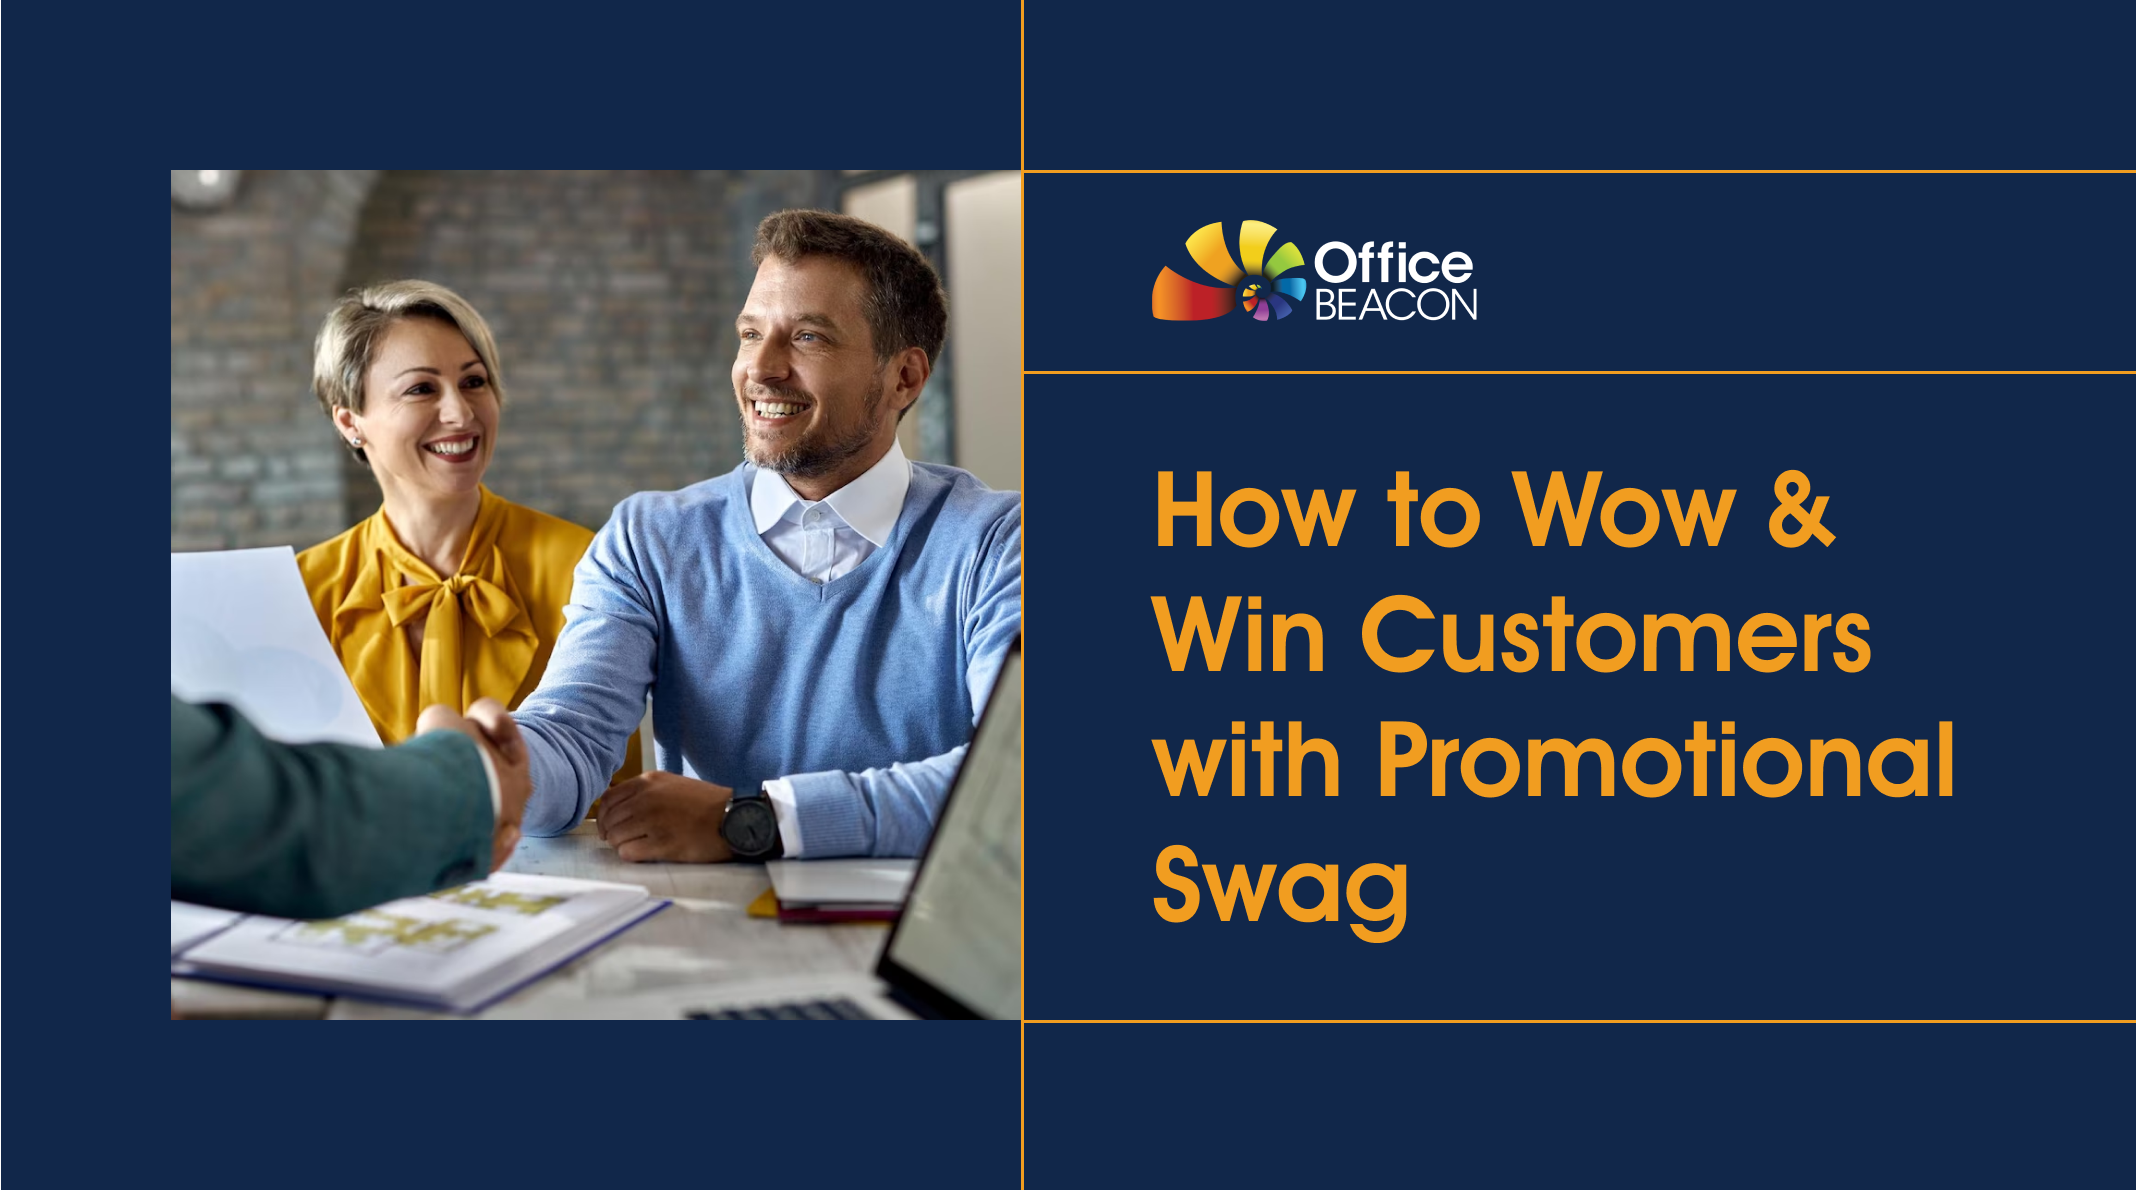 How to Wow & Win Customers with Promotional Swag